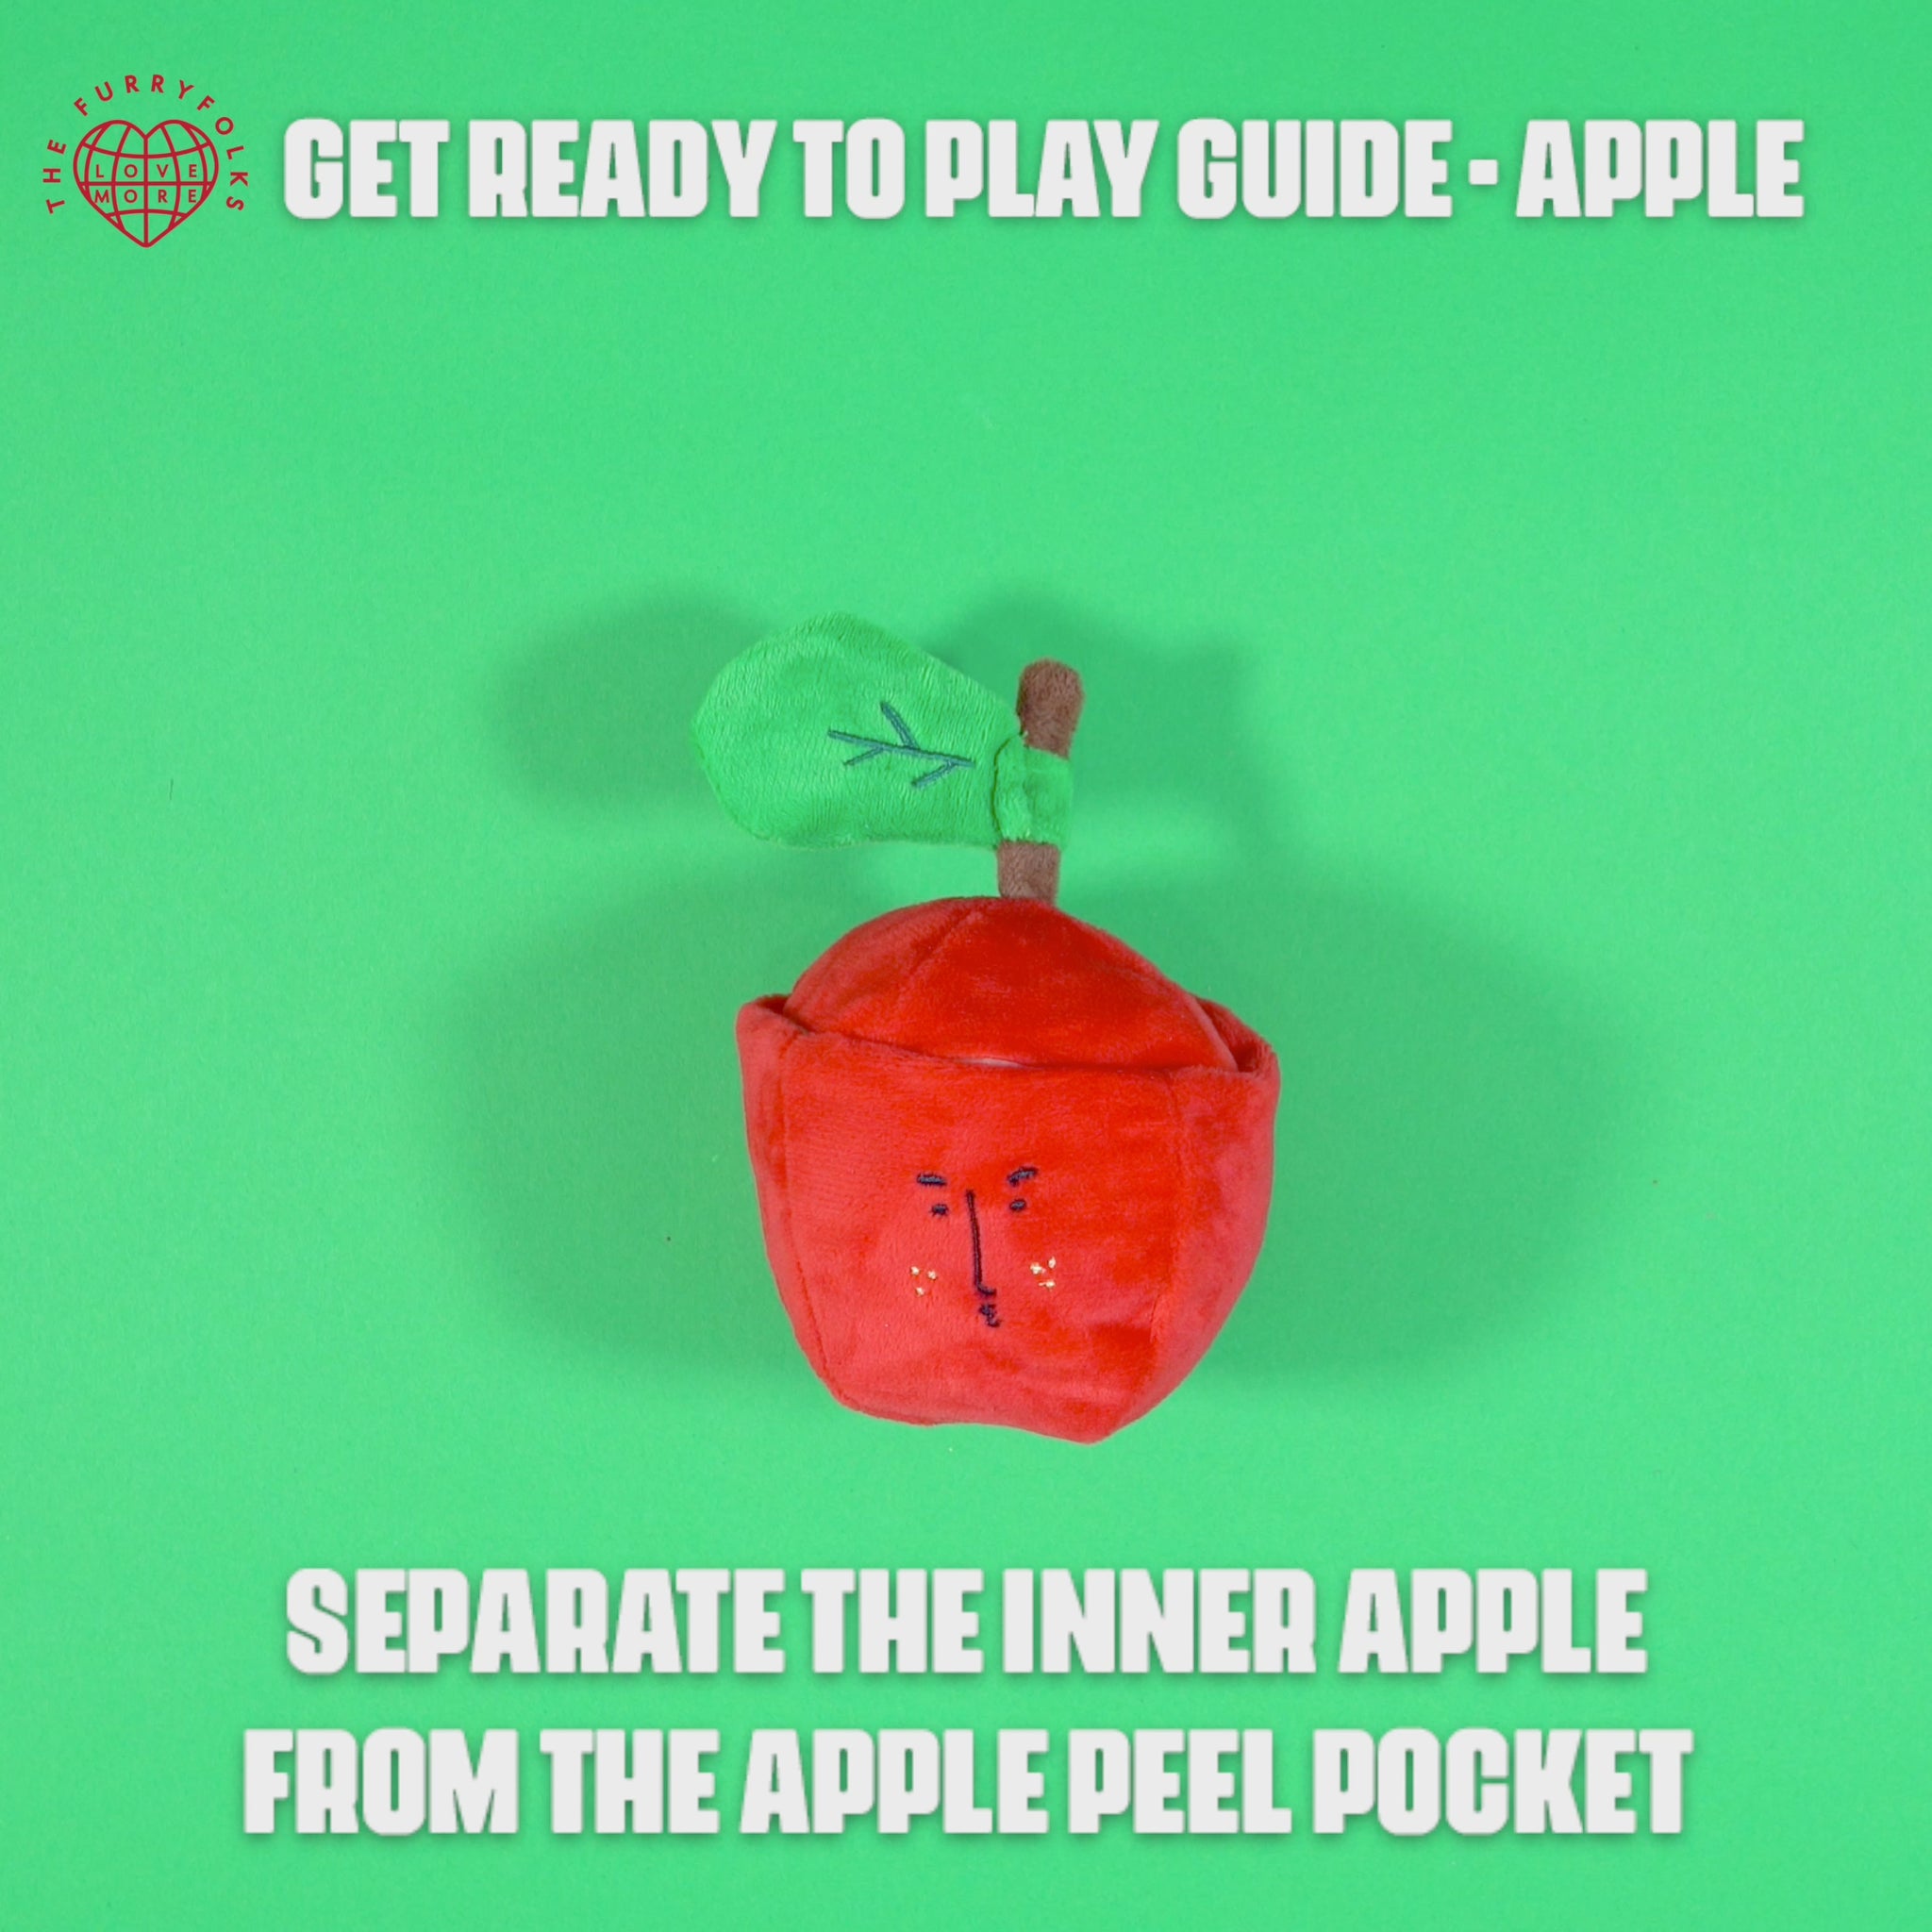 the furryfoks' apple nosework Dog toy guide Video.